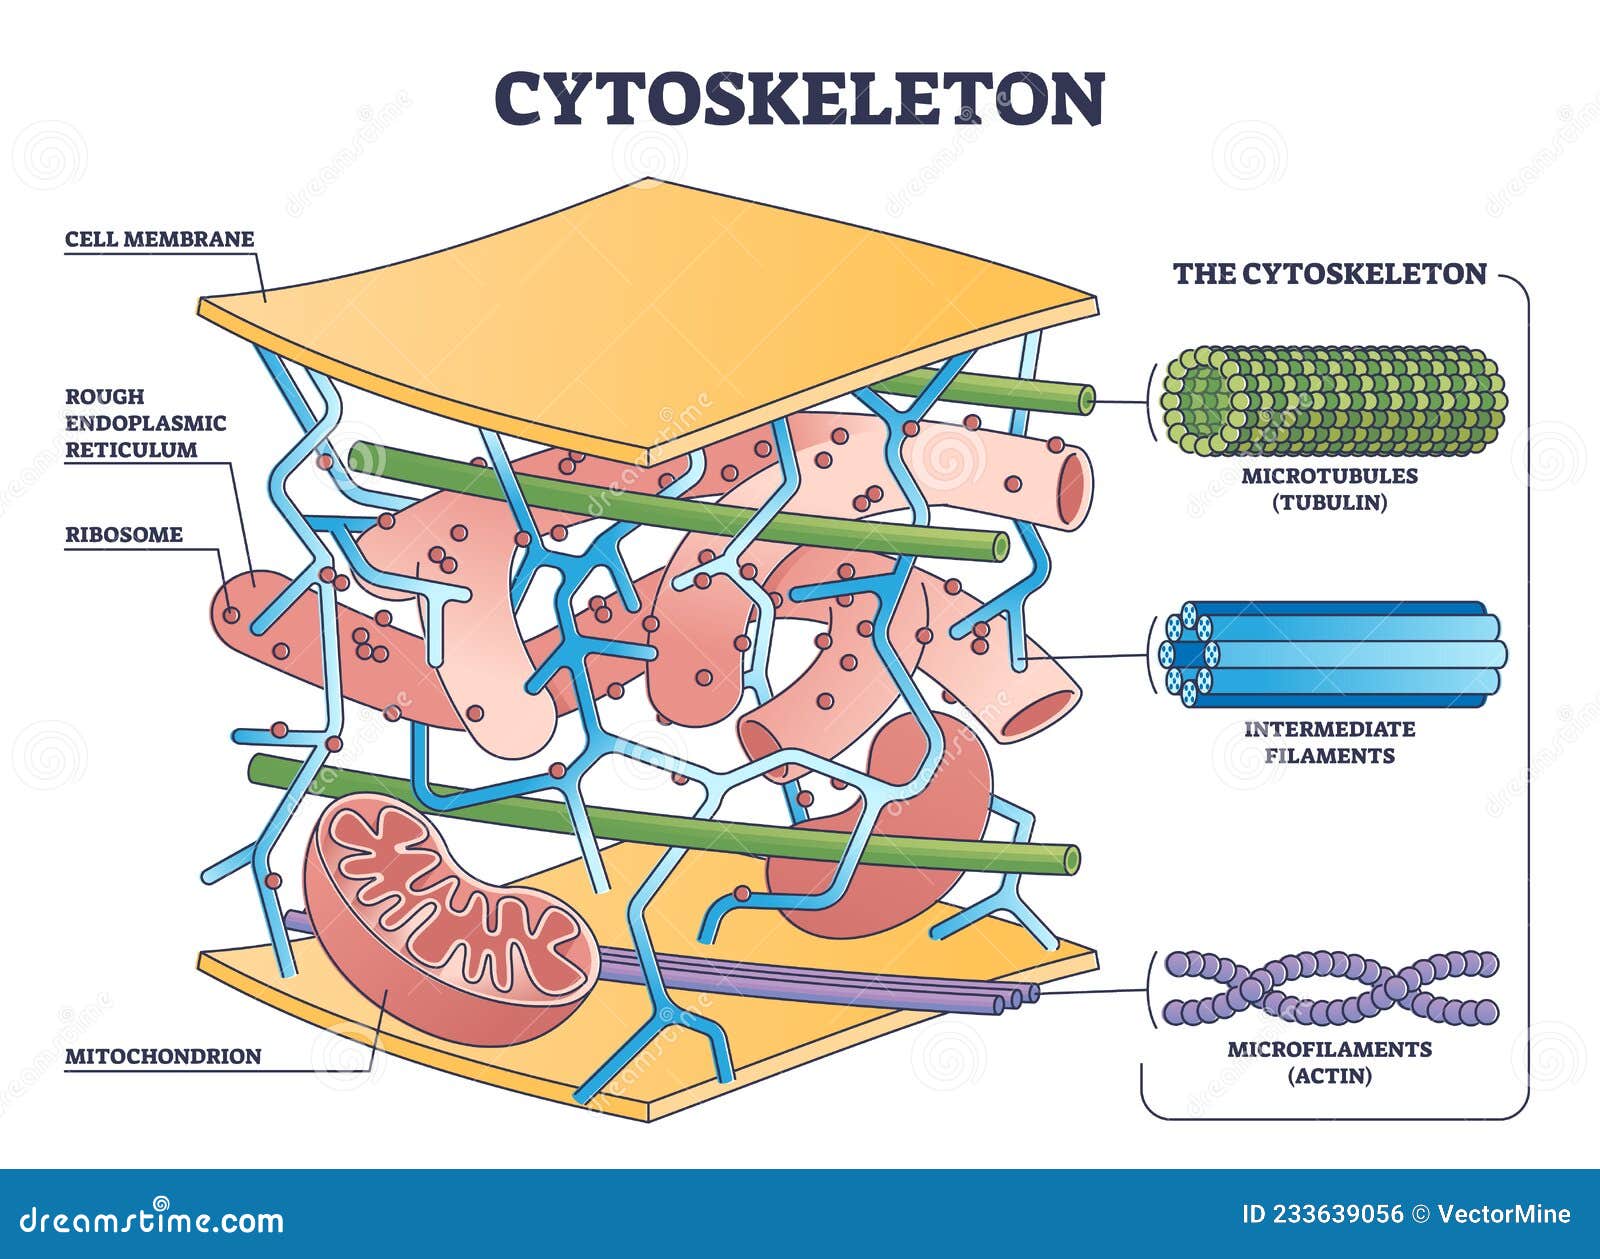 cytoskeleton structure as complex protein filaments network outline diagram